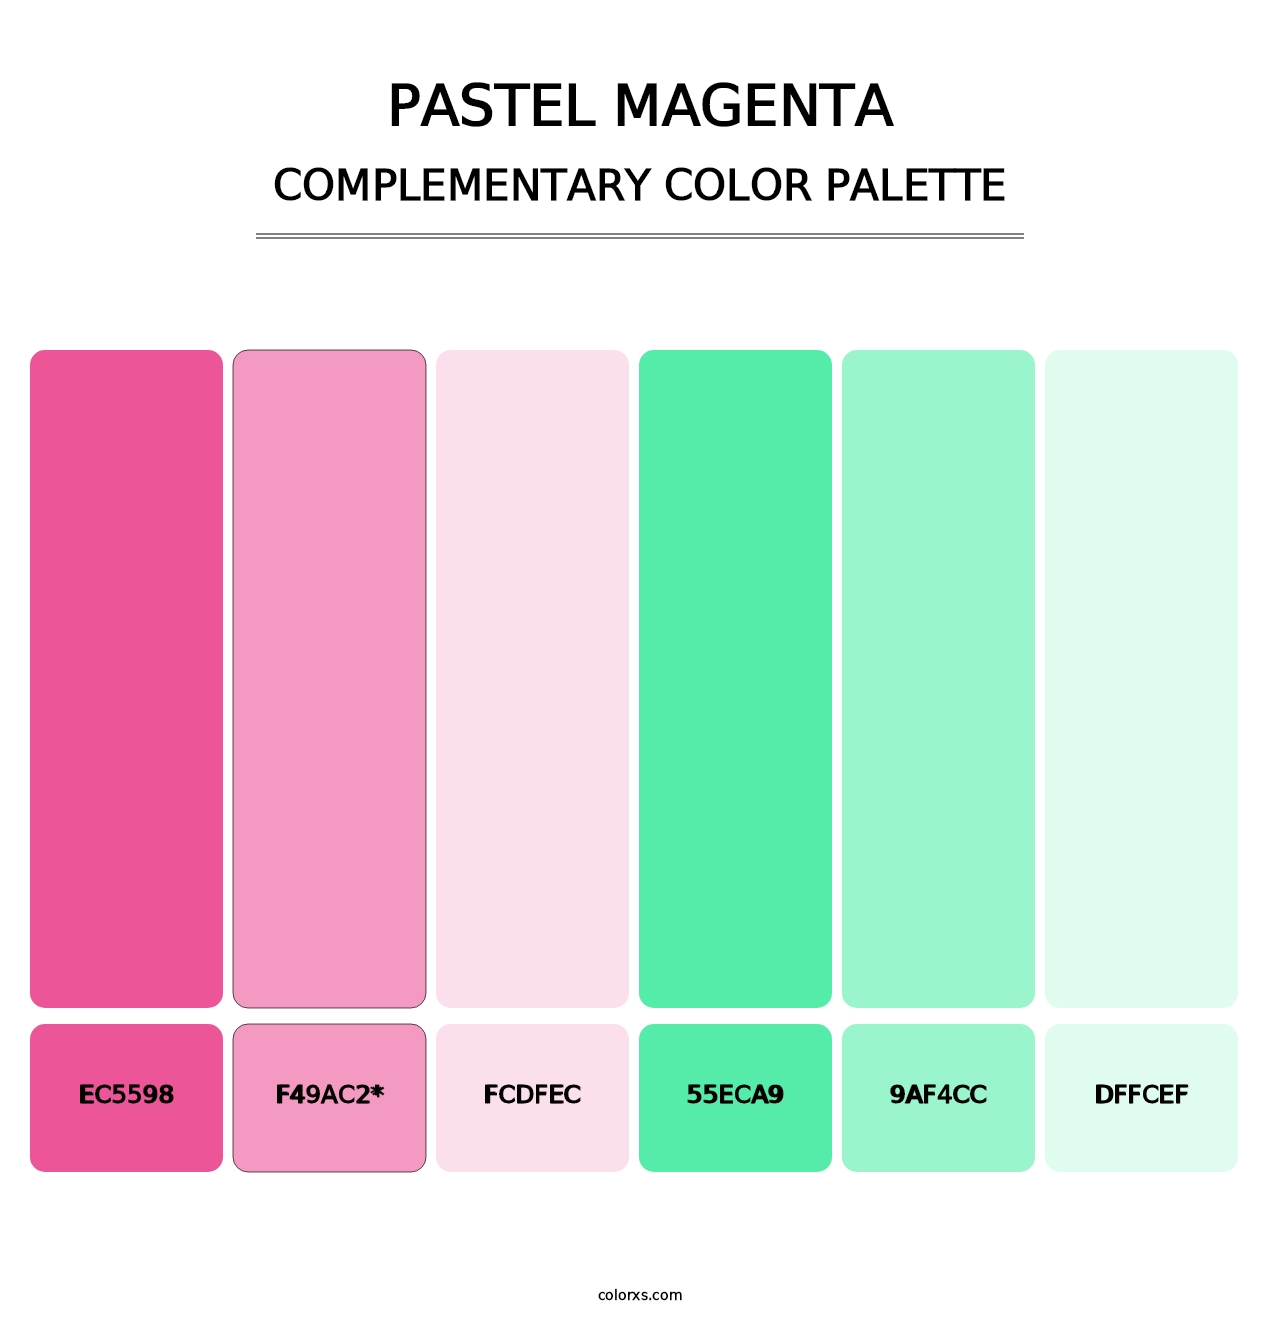 Pastel Magenta - Complementary Color Palette